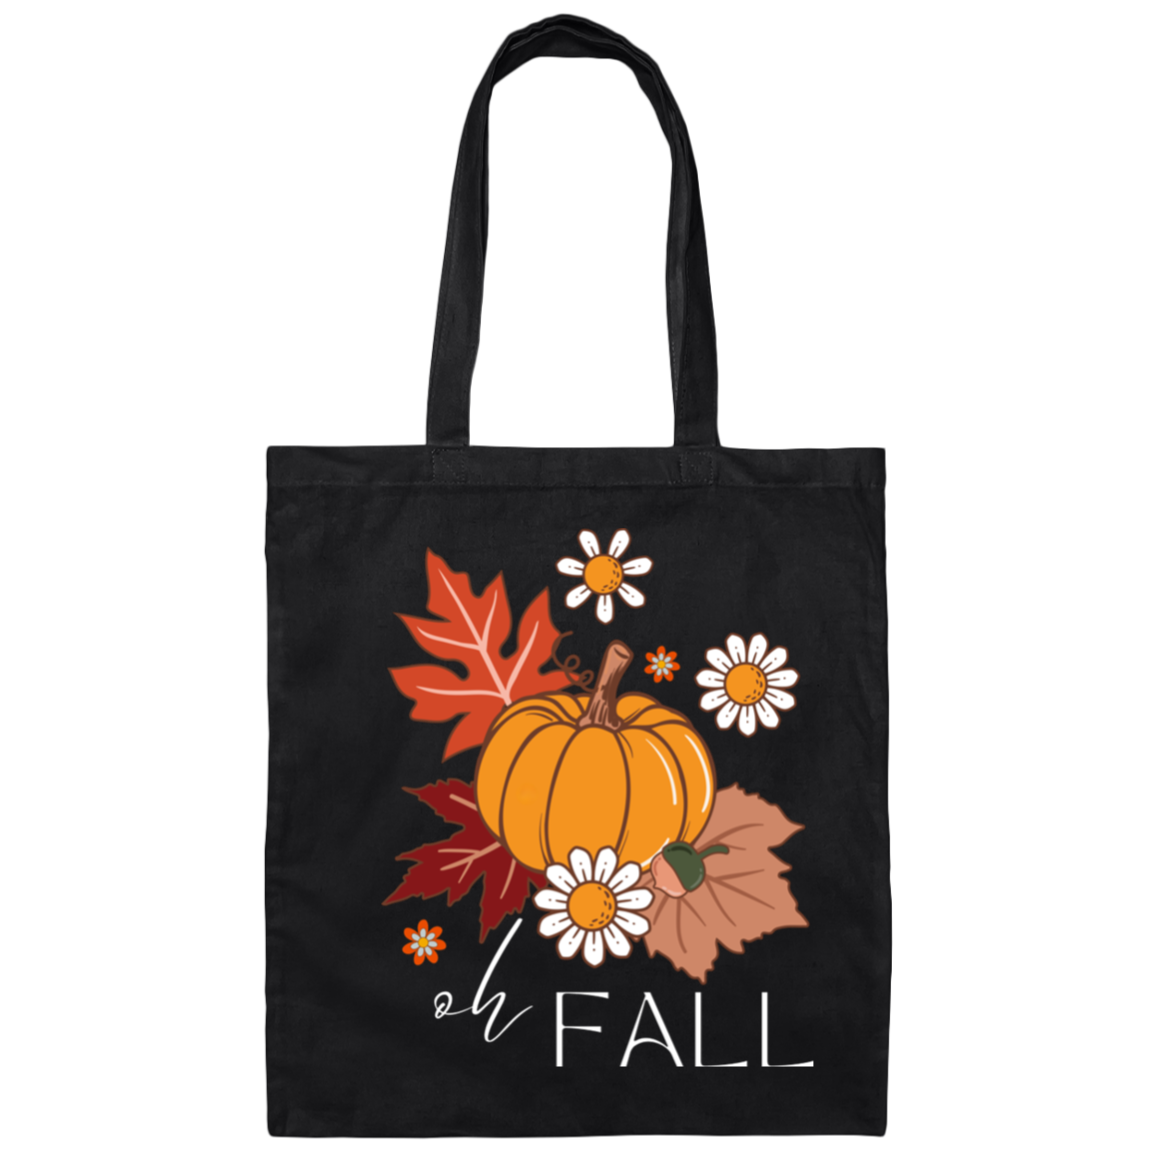 Oh Fall Canvas Tote Bag